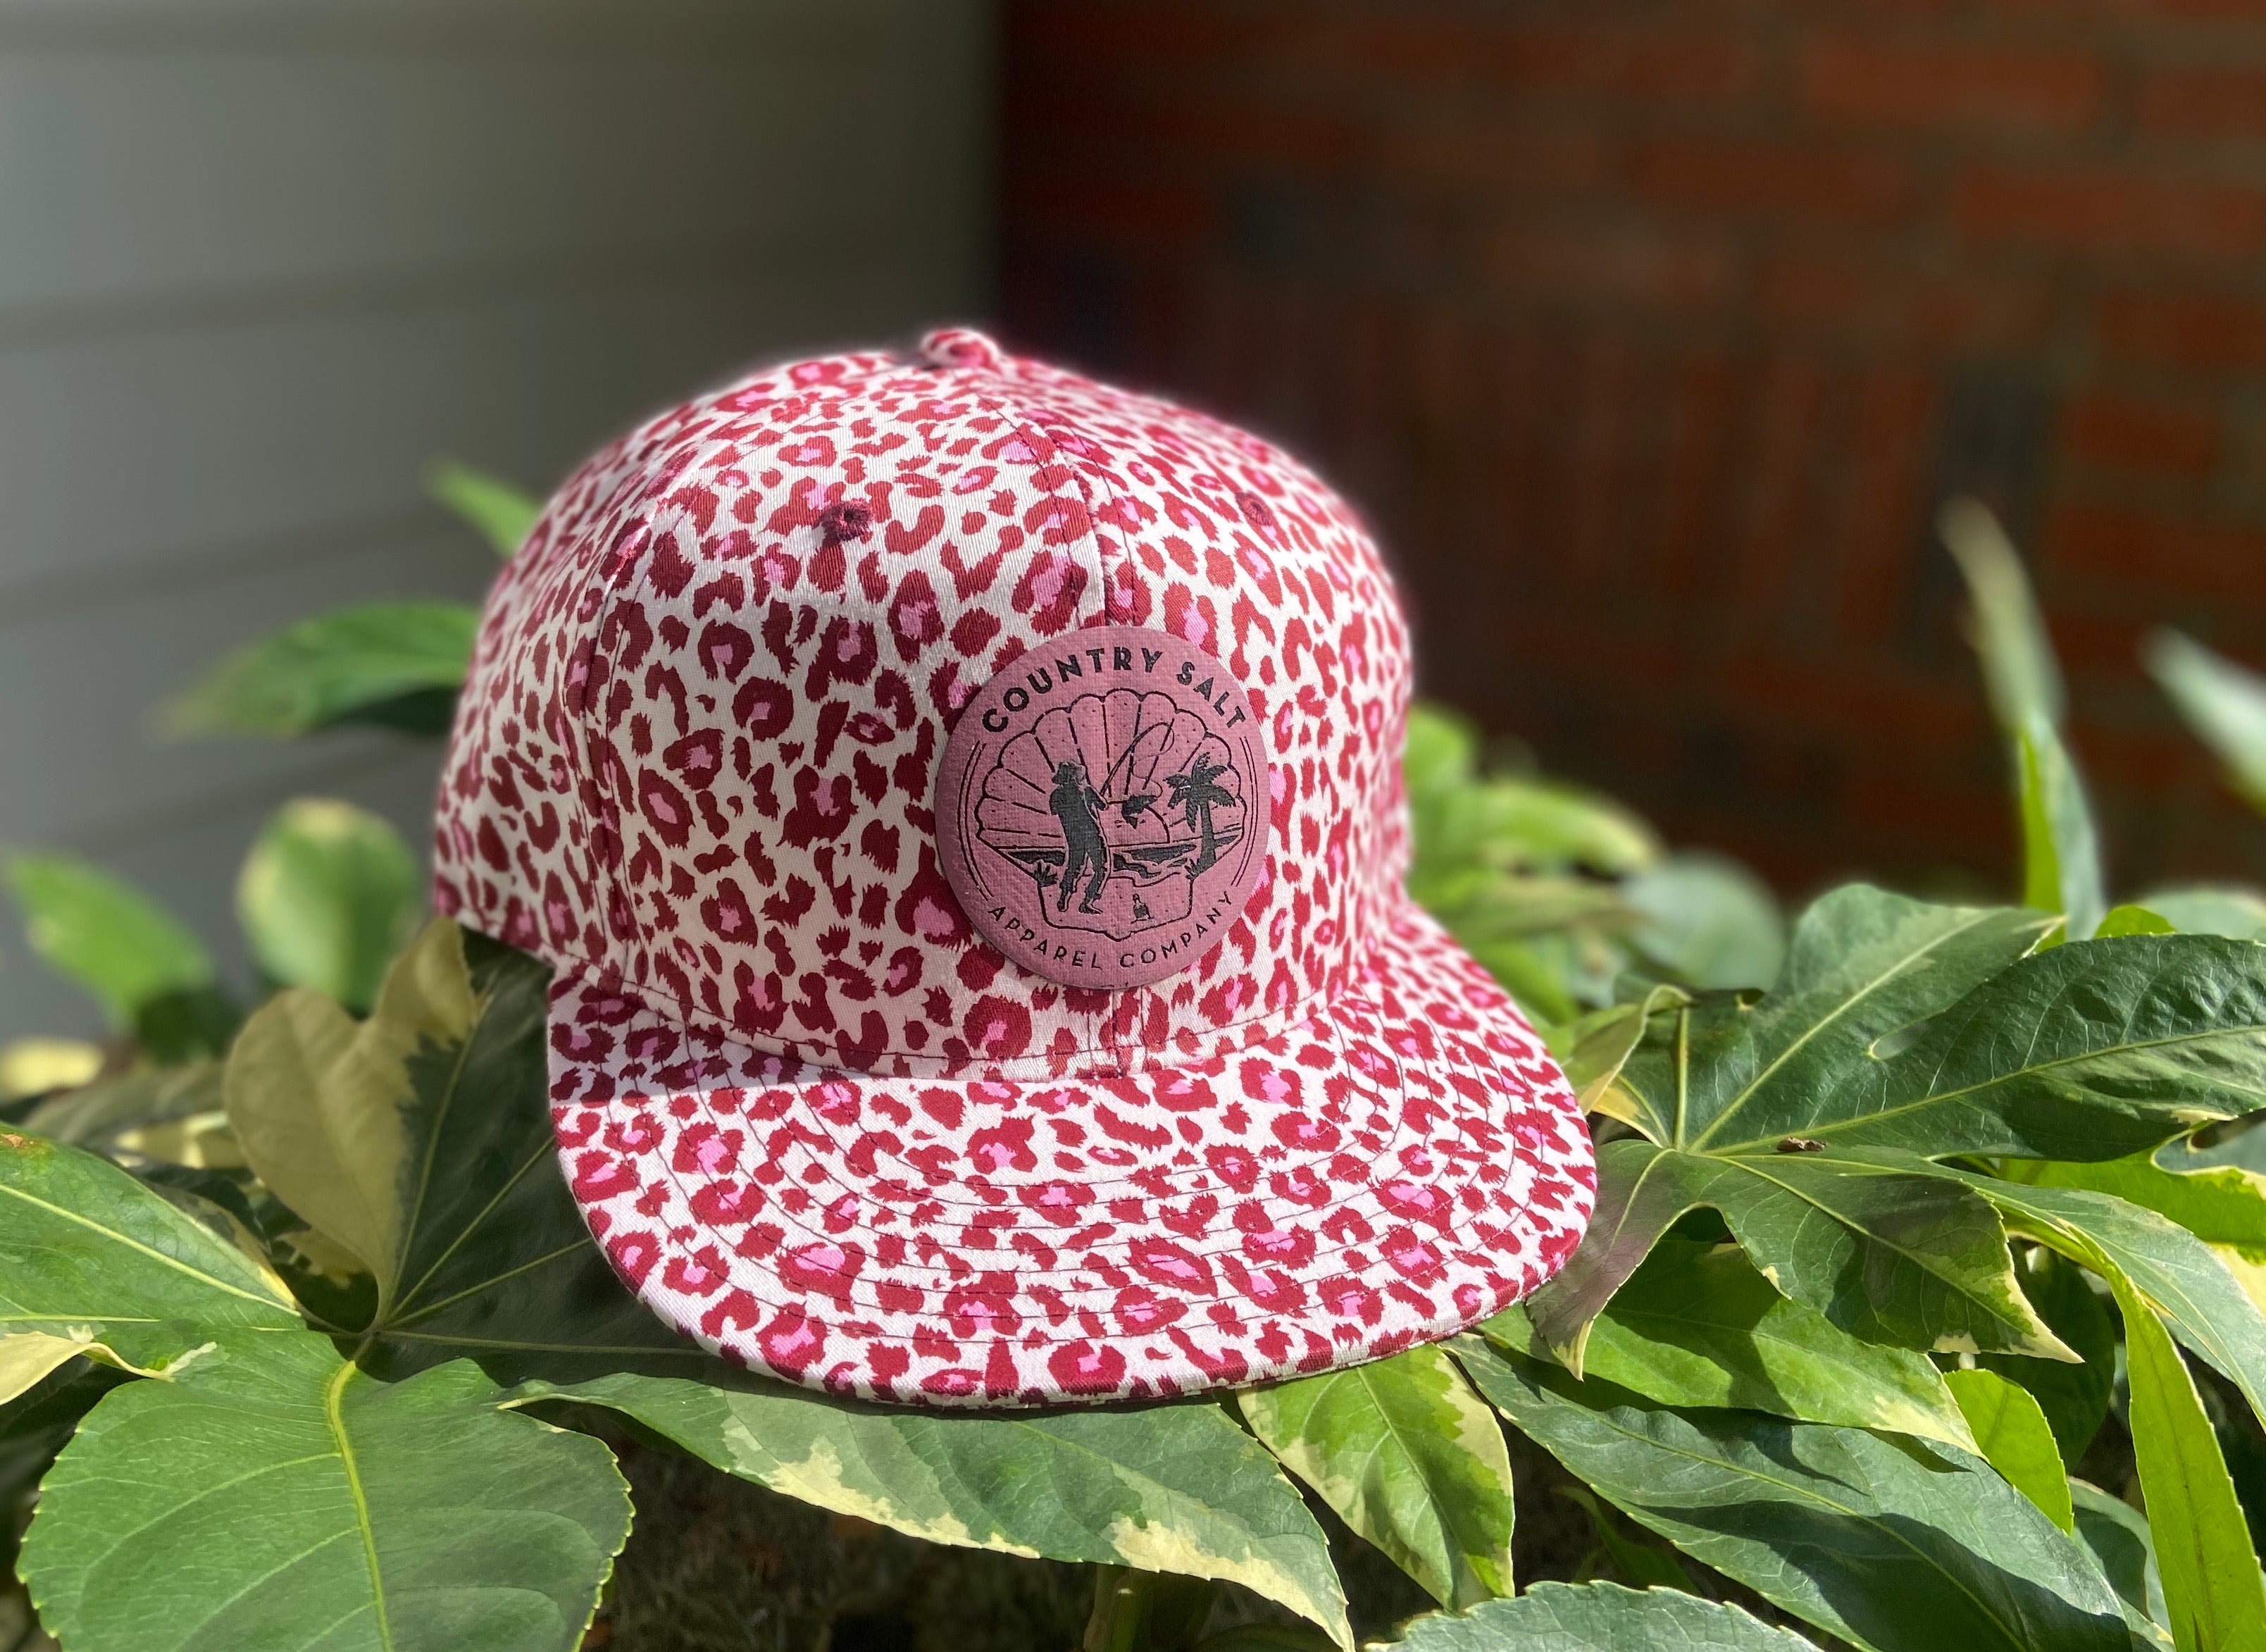 The "Pink Cheetah" Hat – Country Salt Apparel